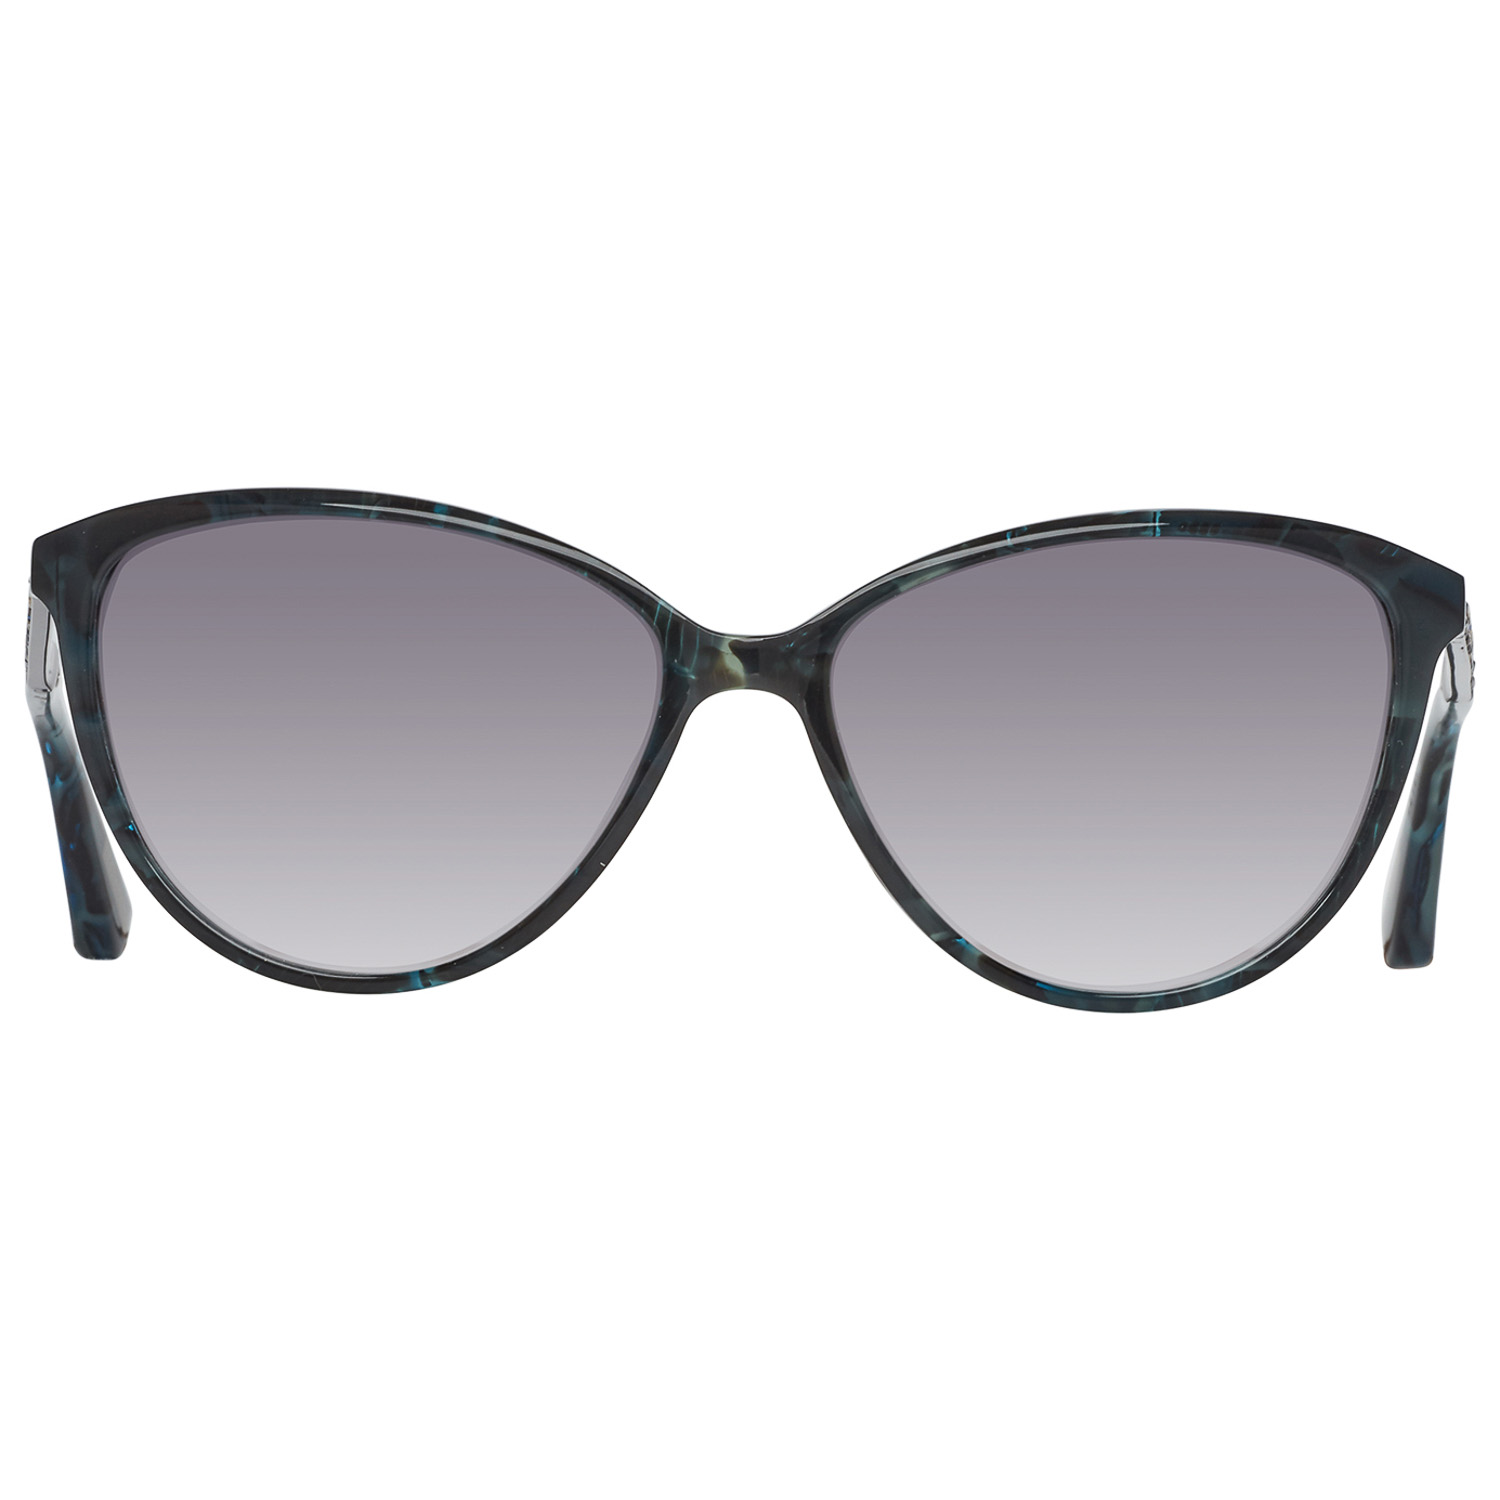 Guess By Marciano Sunglasses GM0755 90C 57 Blue